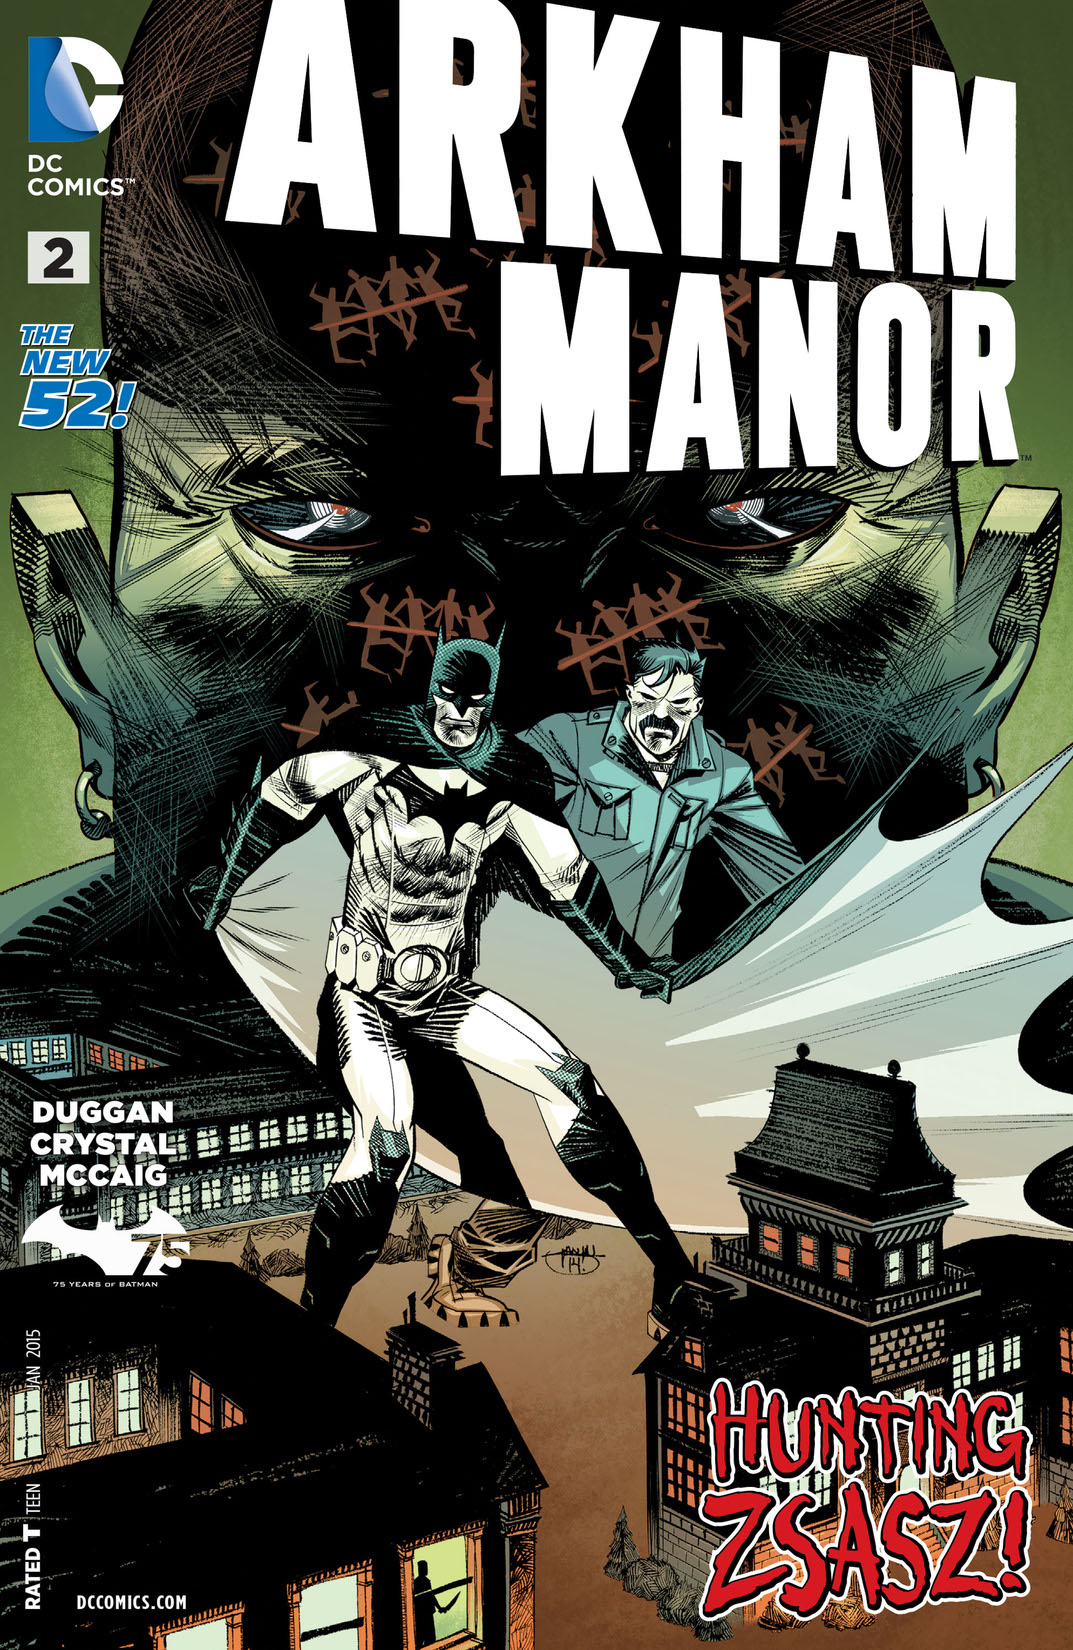 Arkham Manor #2 preview images